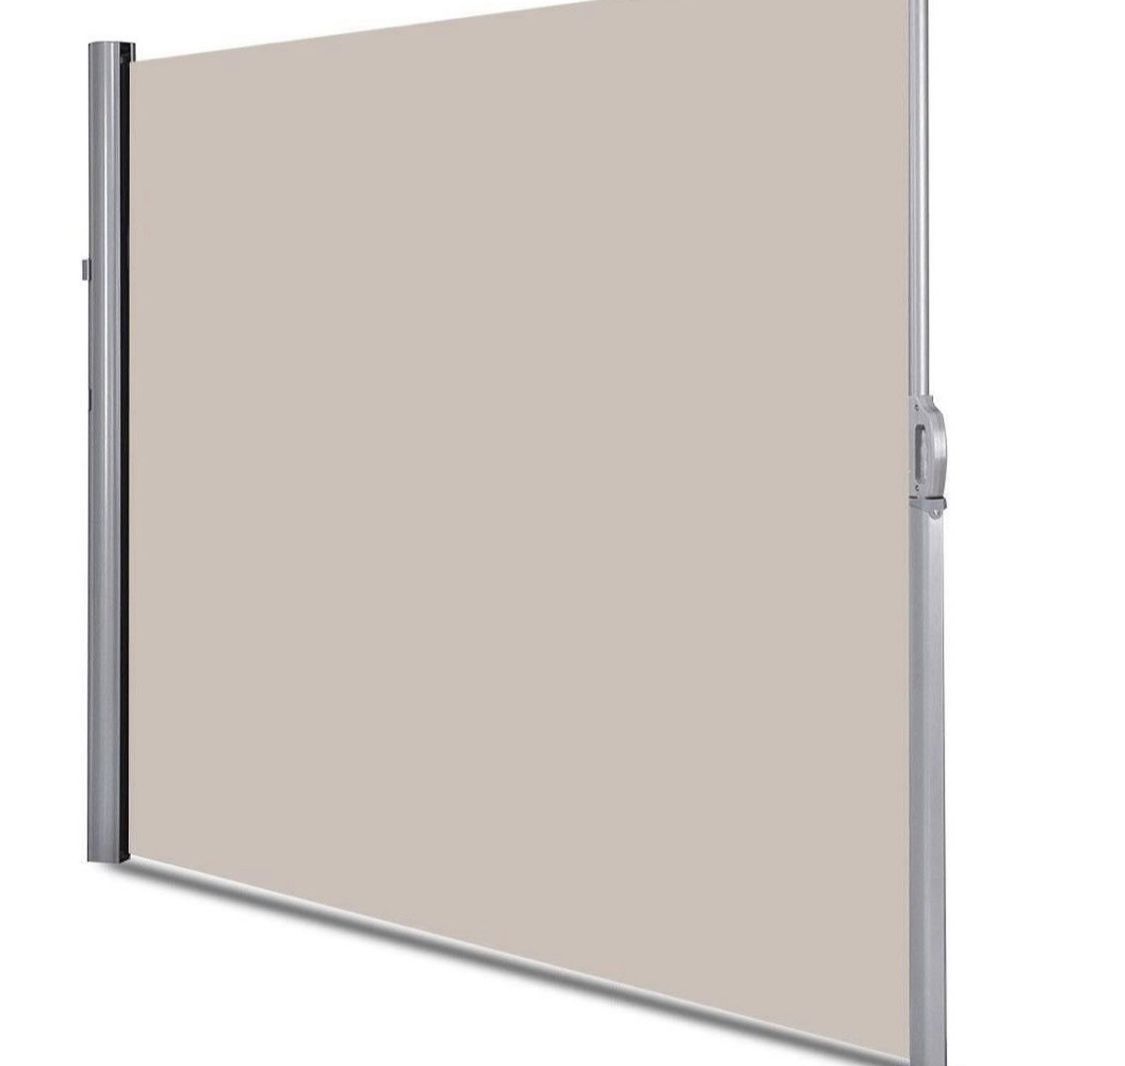 Gymax 118.5" x 71" Patio Retractable Folding Side Awning Screen